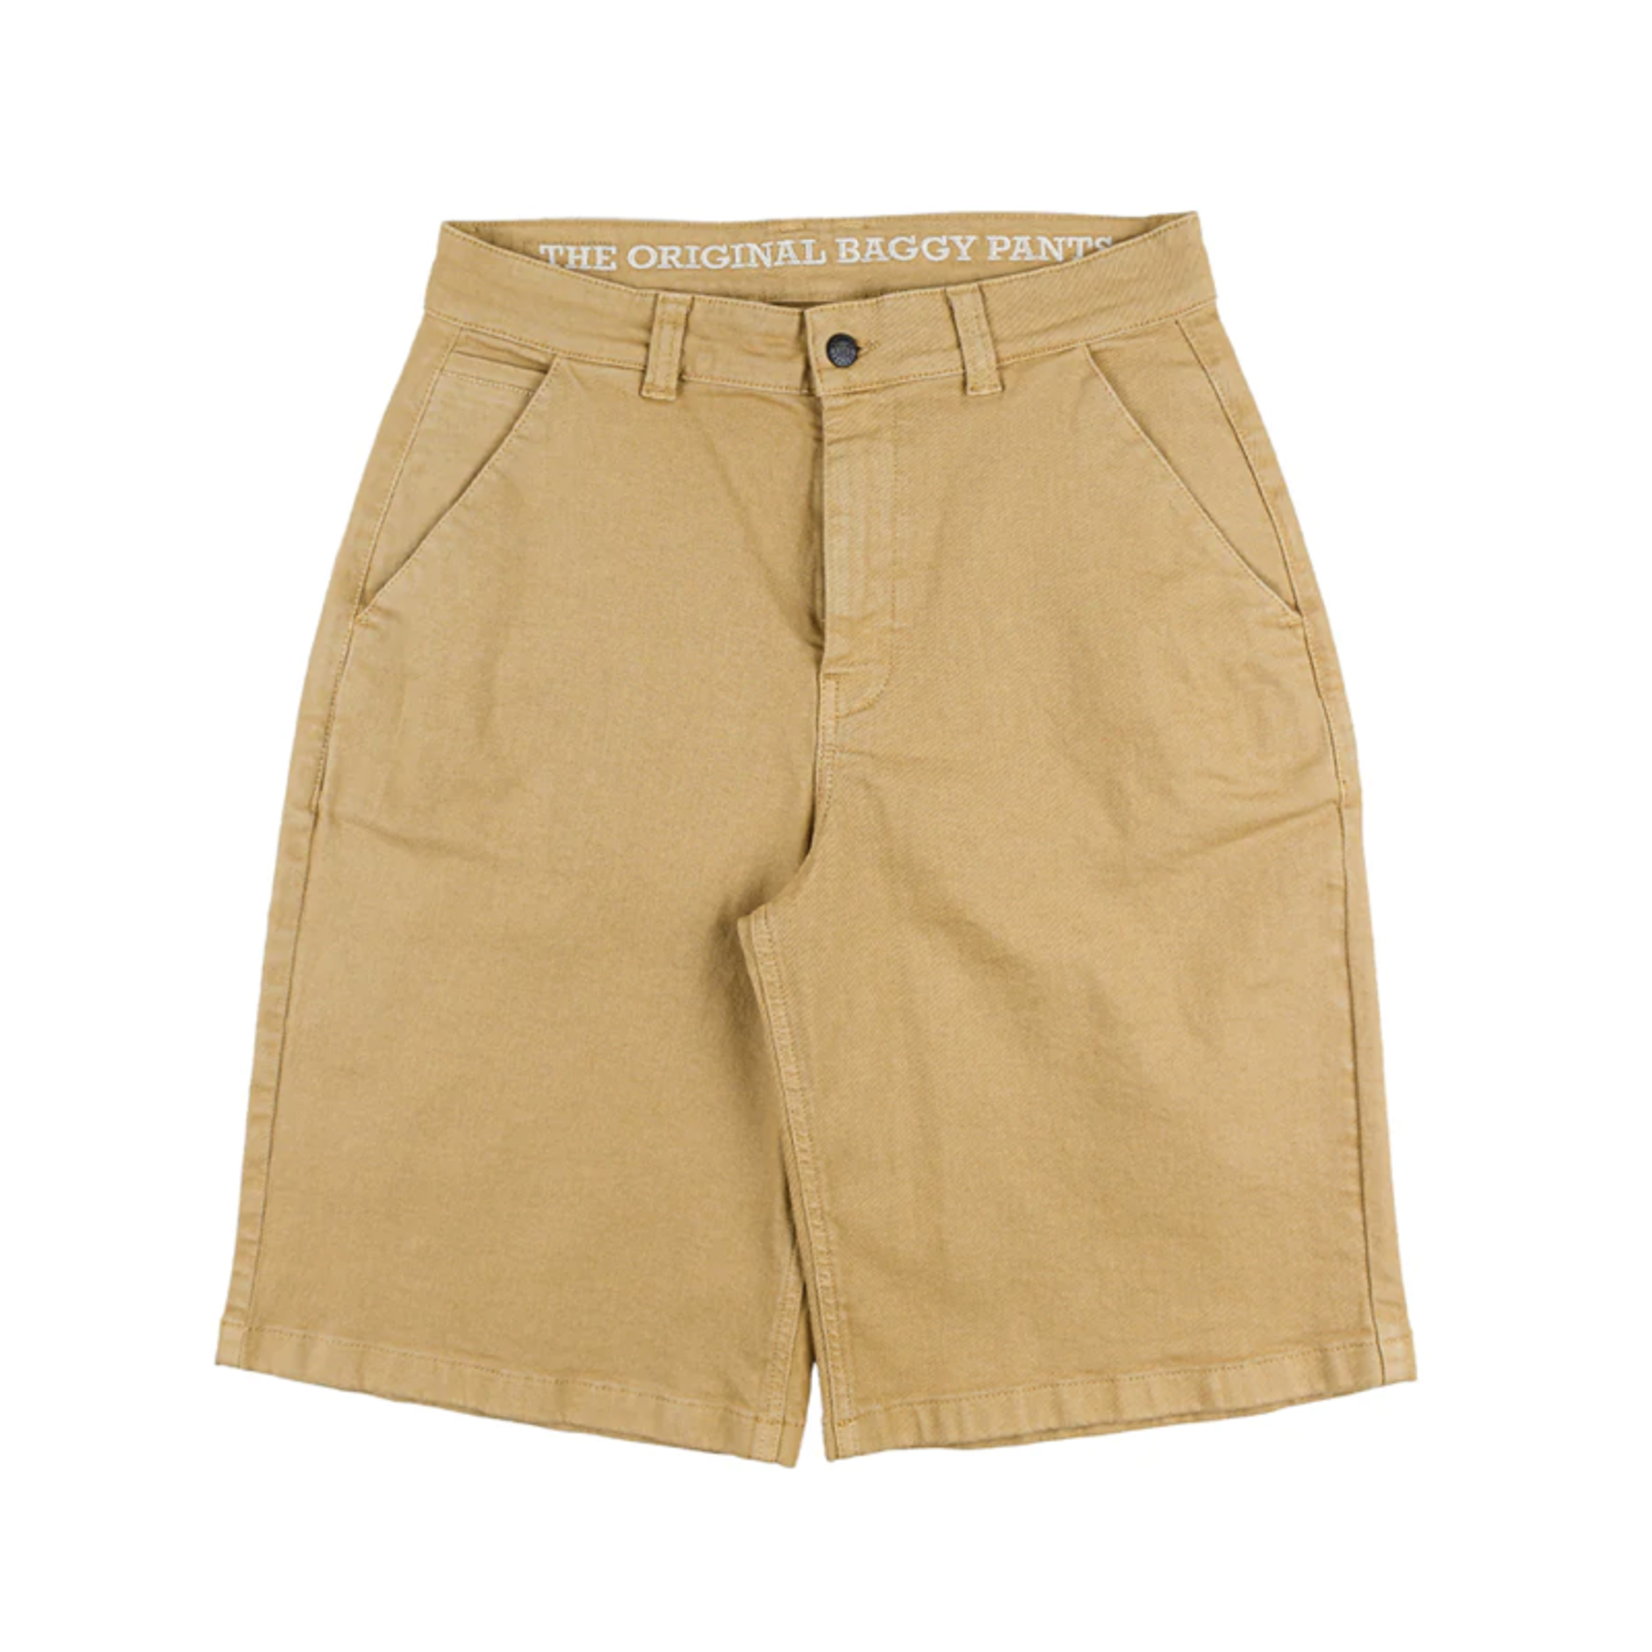 HOMEBOY HOMEBOY X-TRA MONSTER CHINO SHORTS DUST